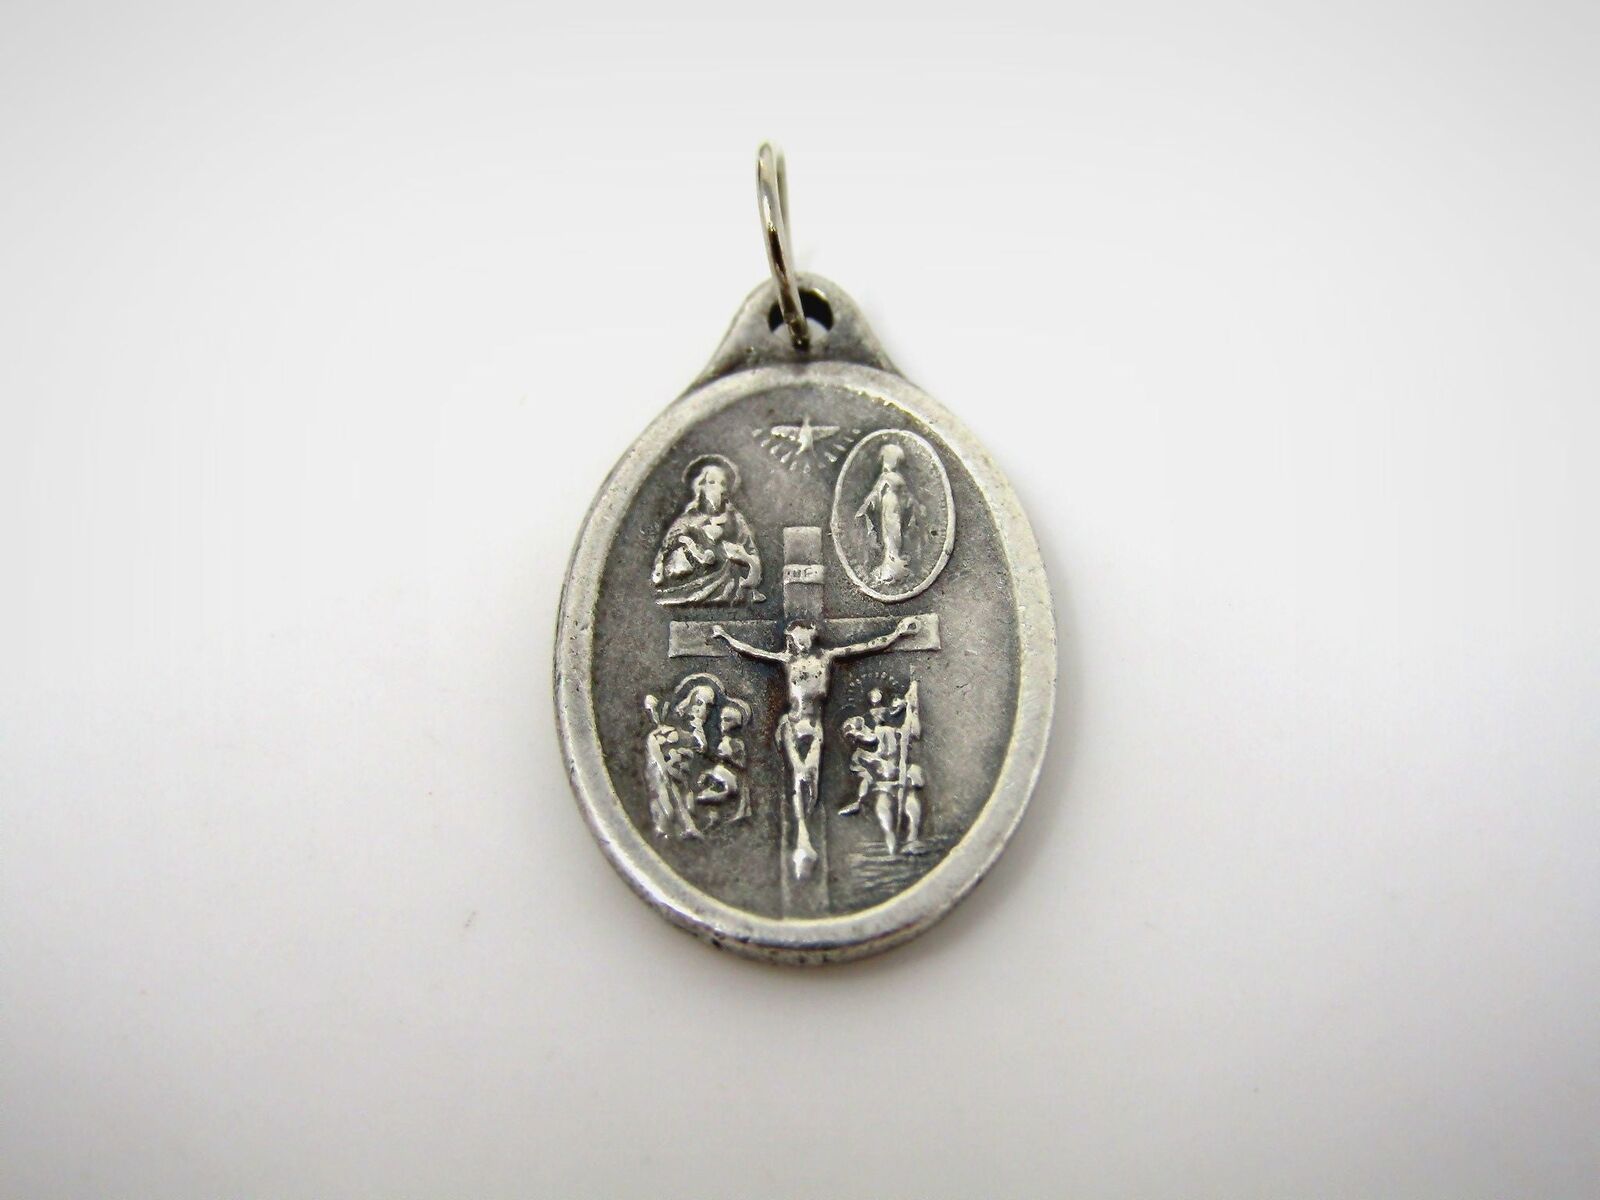 Vintage Christian Medal Charm: Jesus Dove Religious Themes High Quality